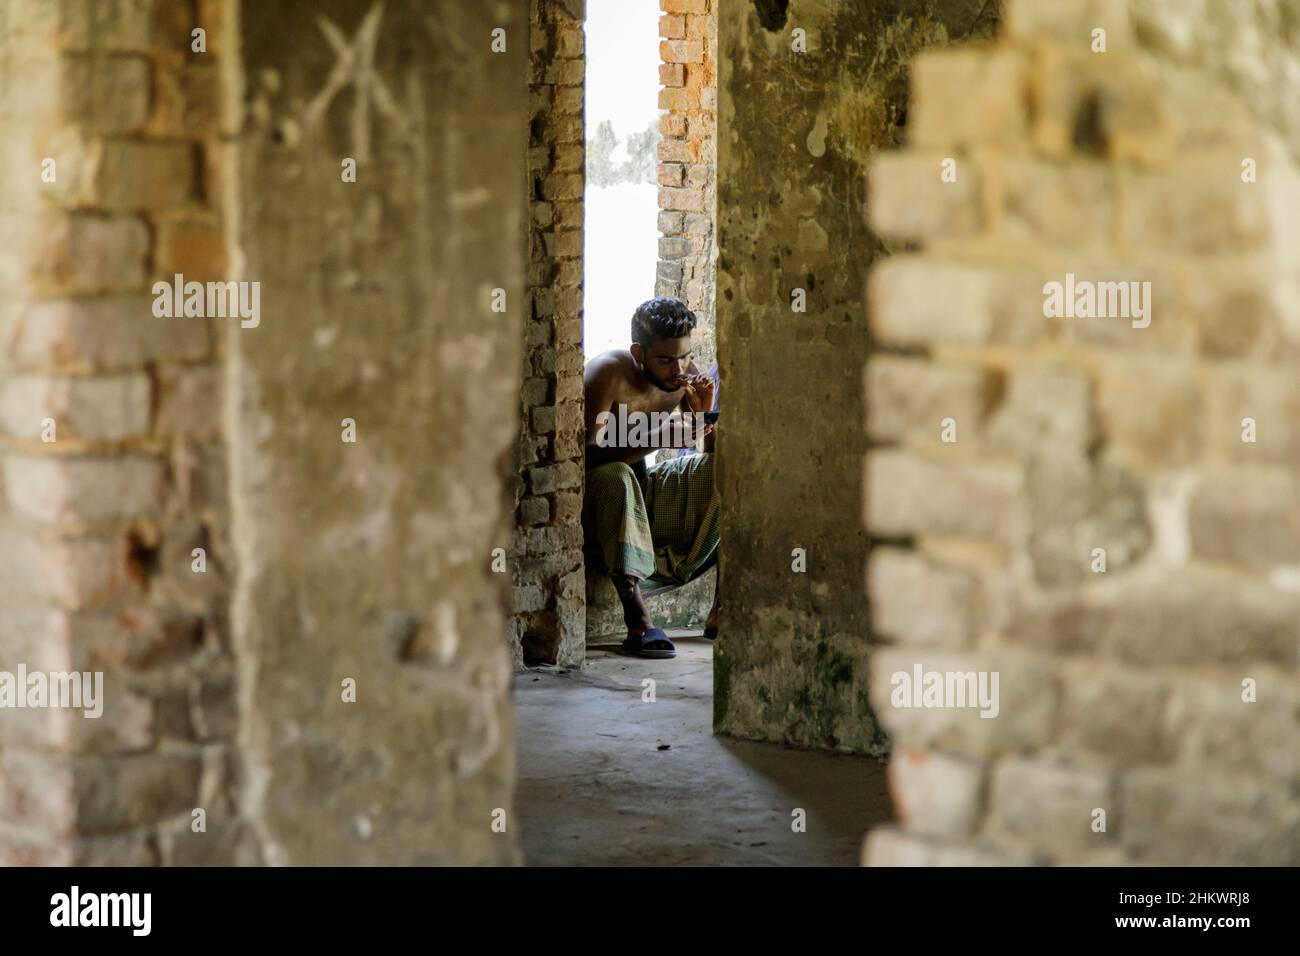 A young man taking a cigarette break in the ruins of the Teota Zamindar Palace in the Manikganj district. The palace, believed to be around 300 years old, had more than 50 rooms originally. Stock Photo